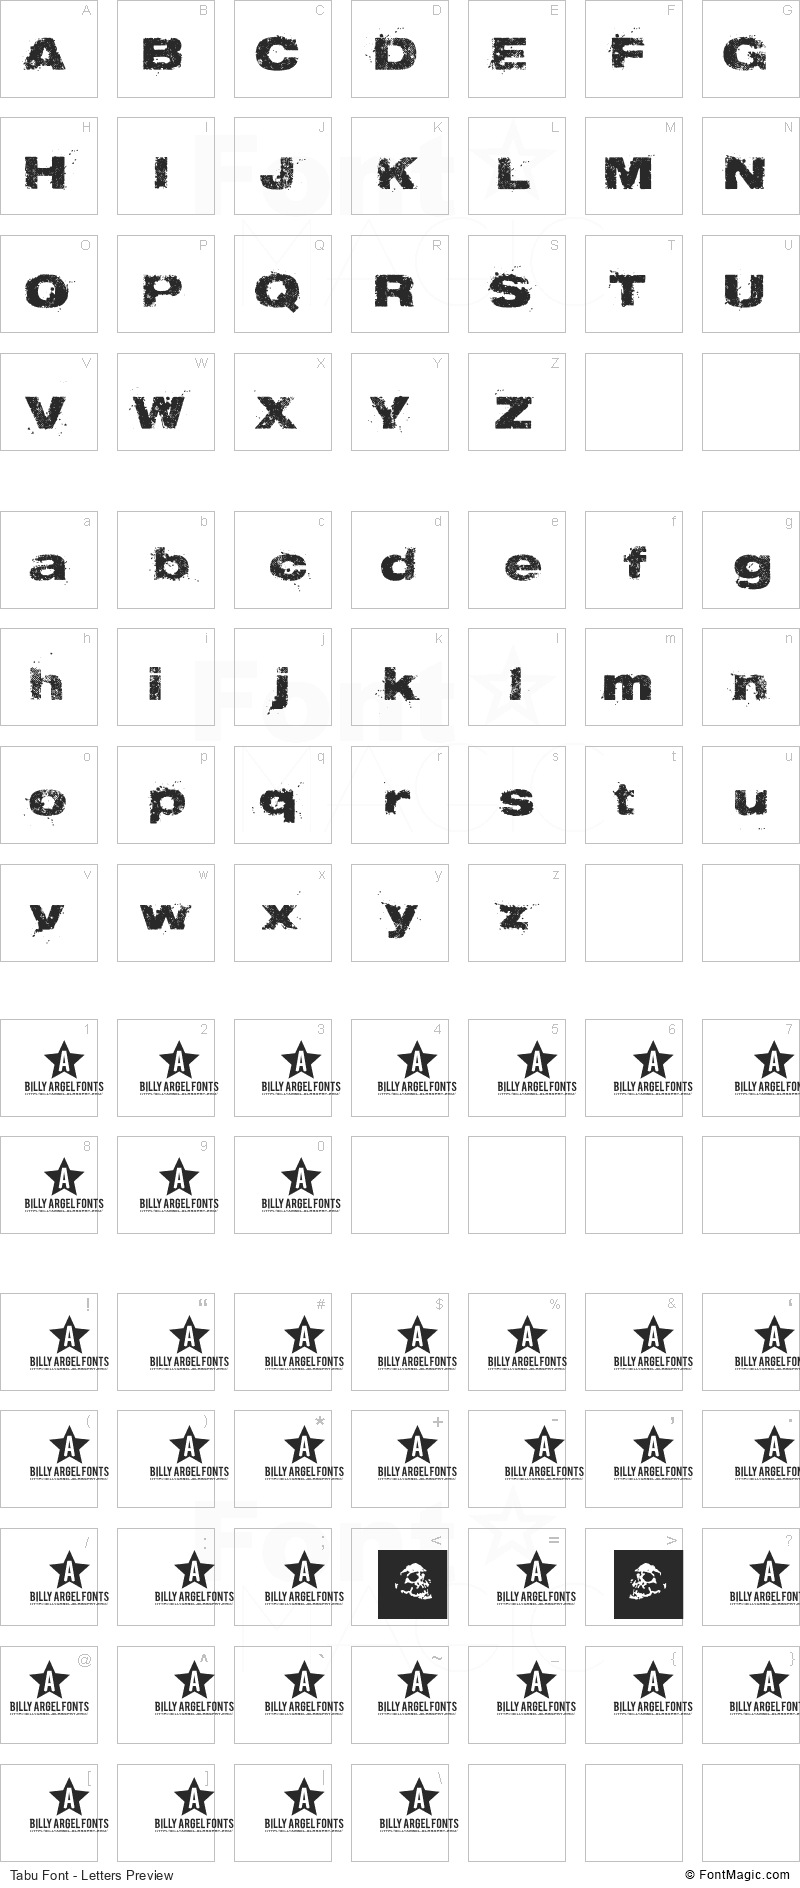 Tabu Font - All Latters Preview Chart